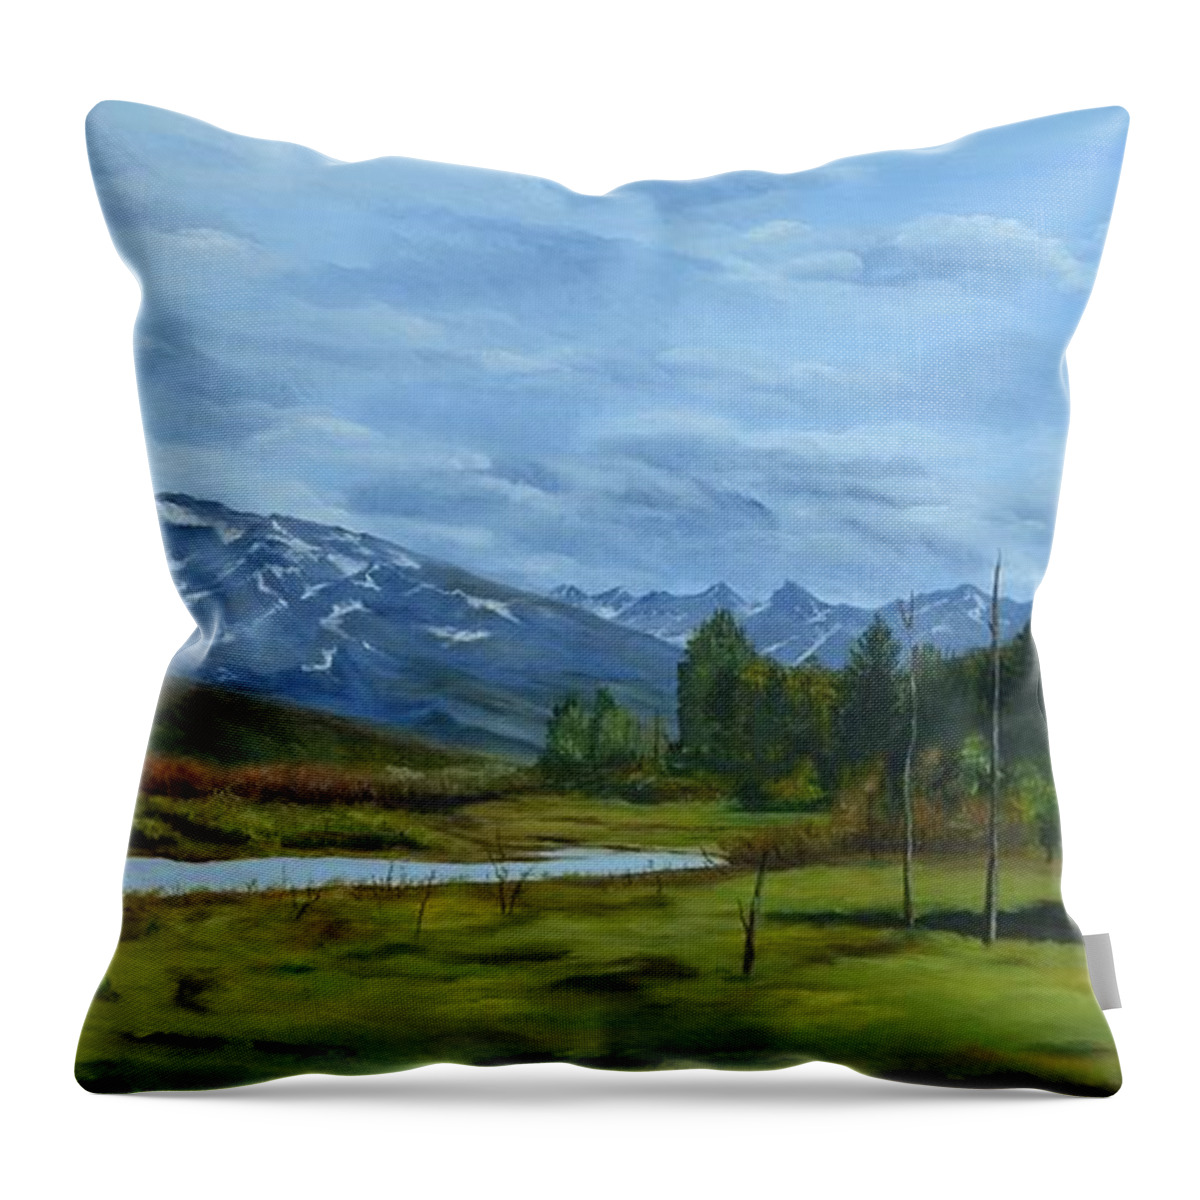 Northern Throw Pillow featuring the painting Wild Alaska by Mary Rogers